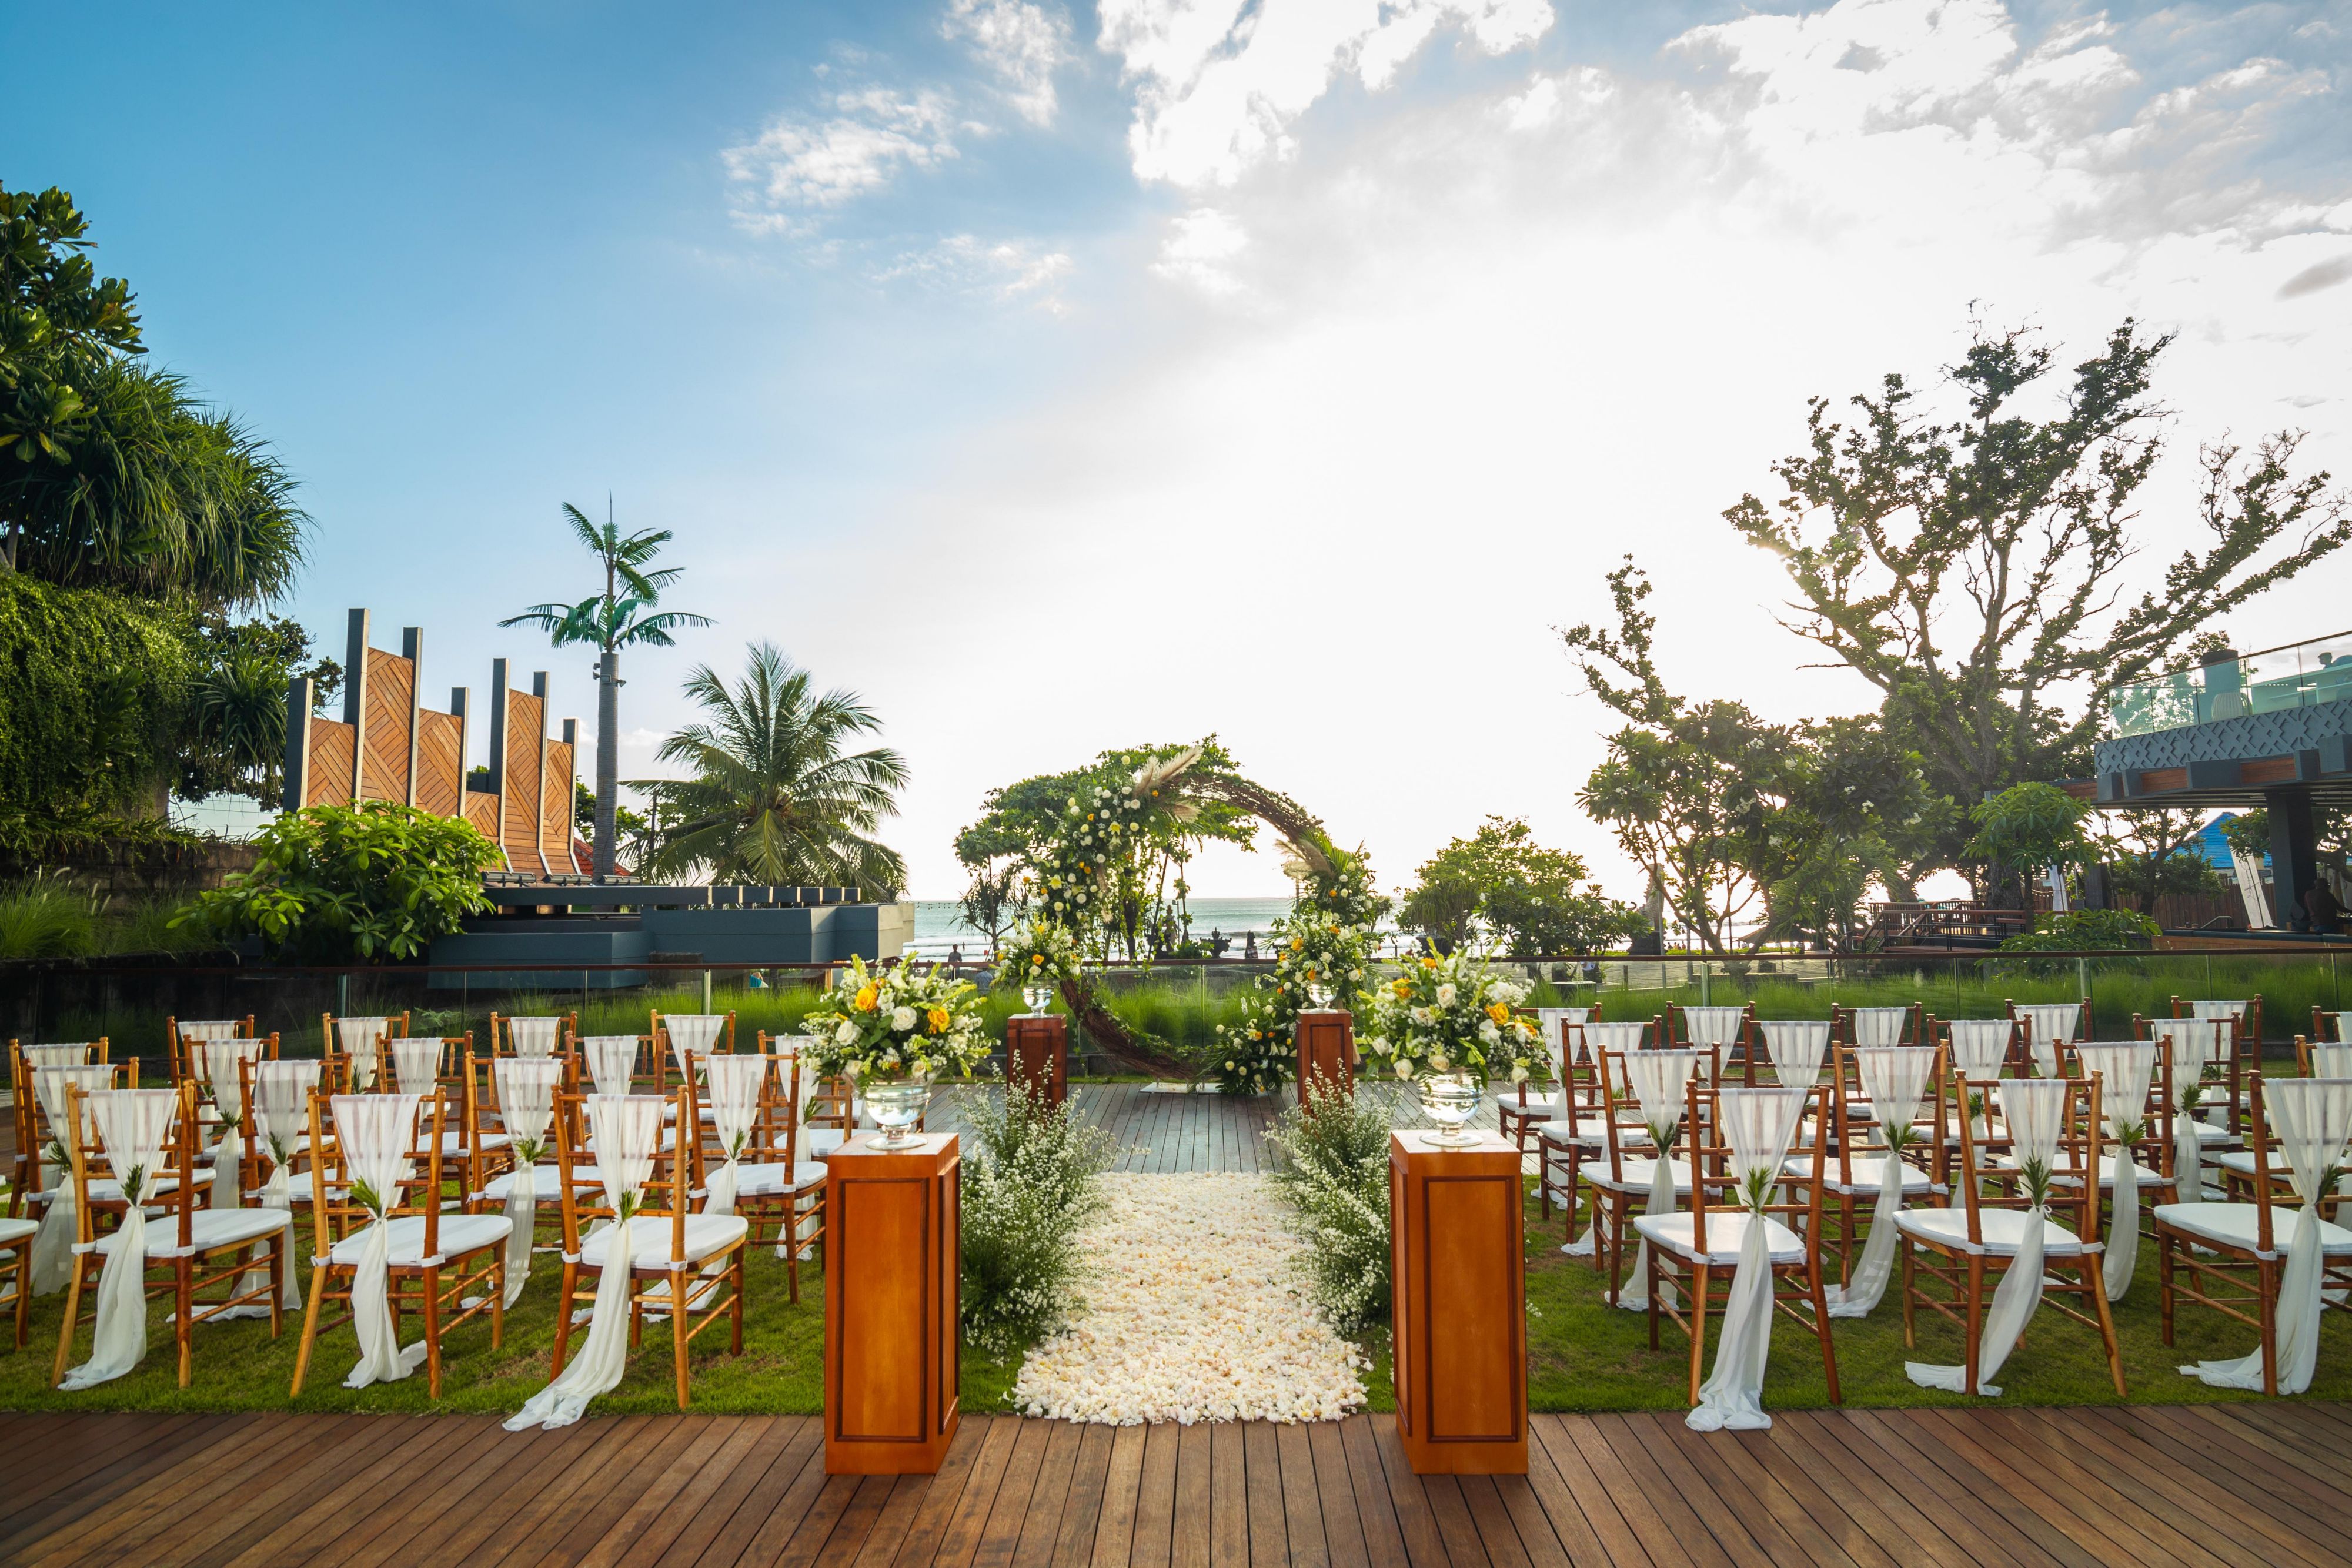 Celebrate your love in the heart of Bali’s most vibrant beachside spot at Hotel Indigo Bali Seminyak Beach. Your special wedding day will sure be an unforgettable one for you and those witnessing your once-in-a-lifetime moment to cherish forever at this Bali wedding venue.